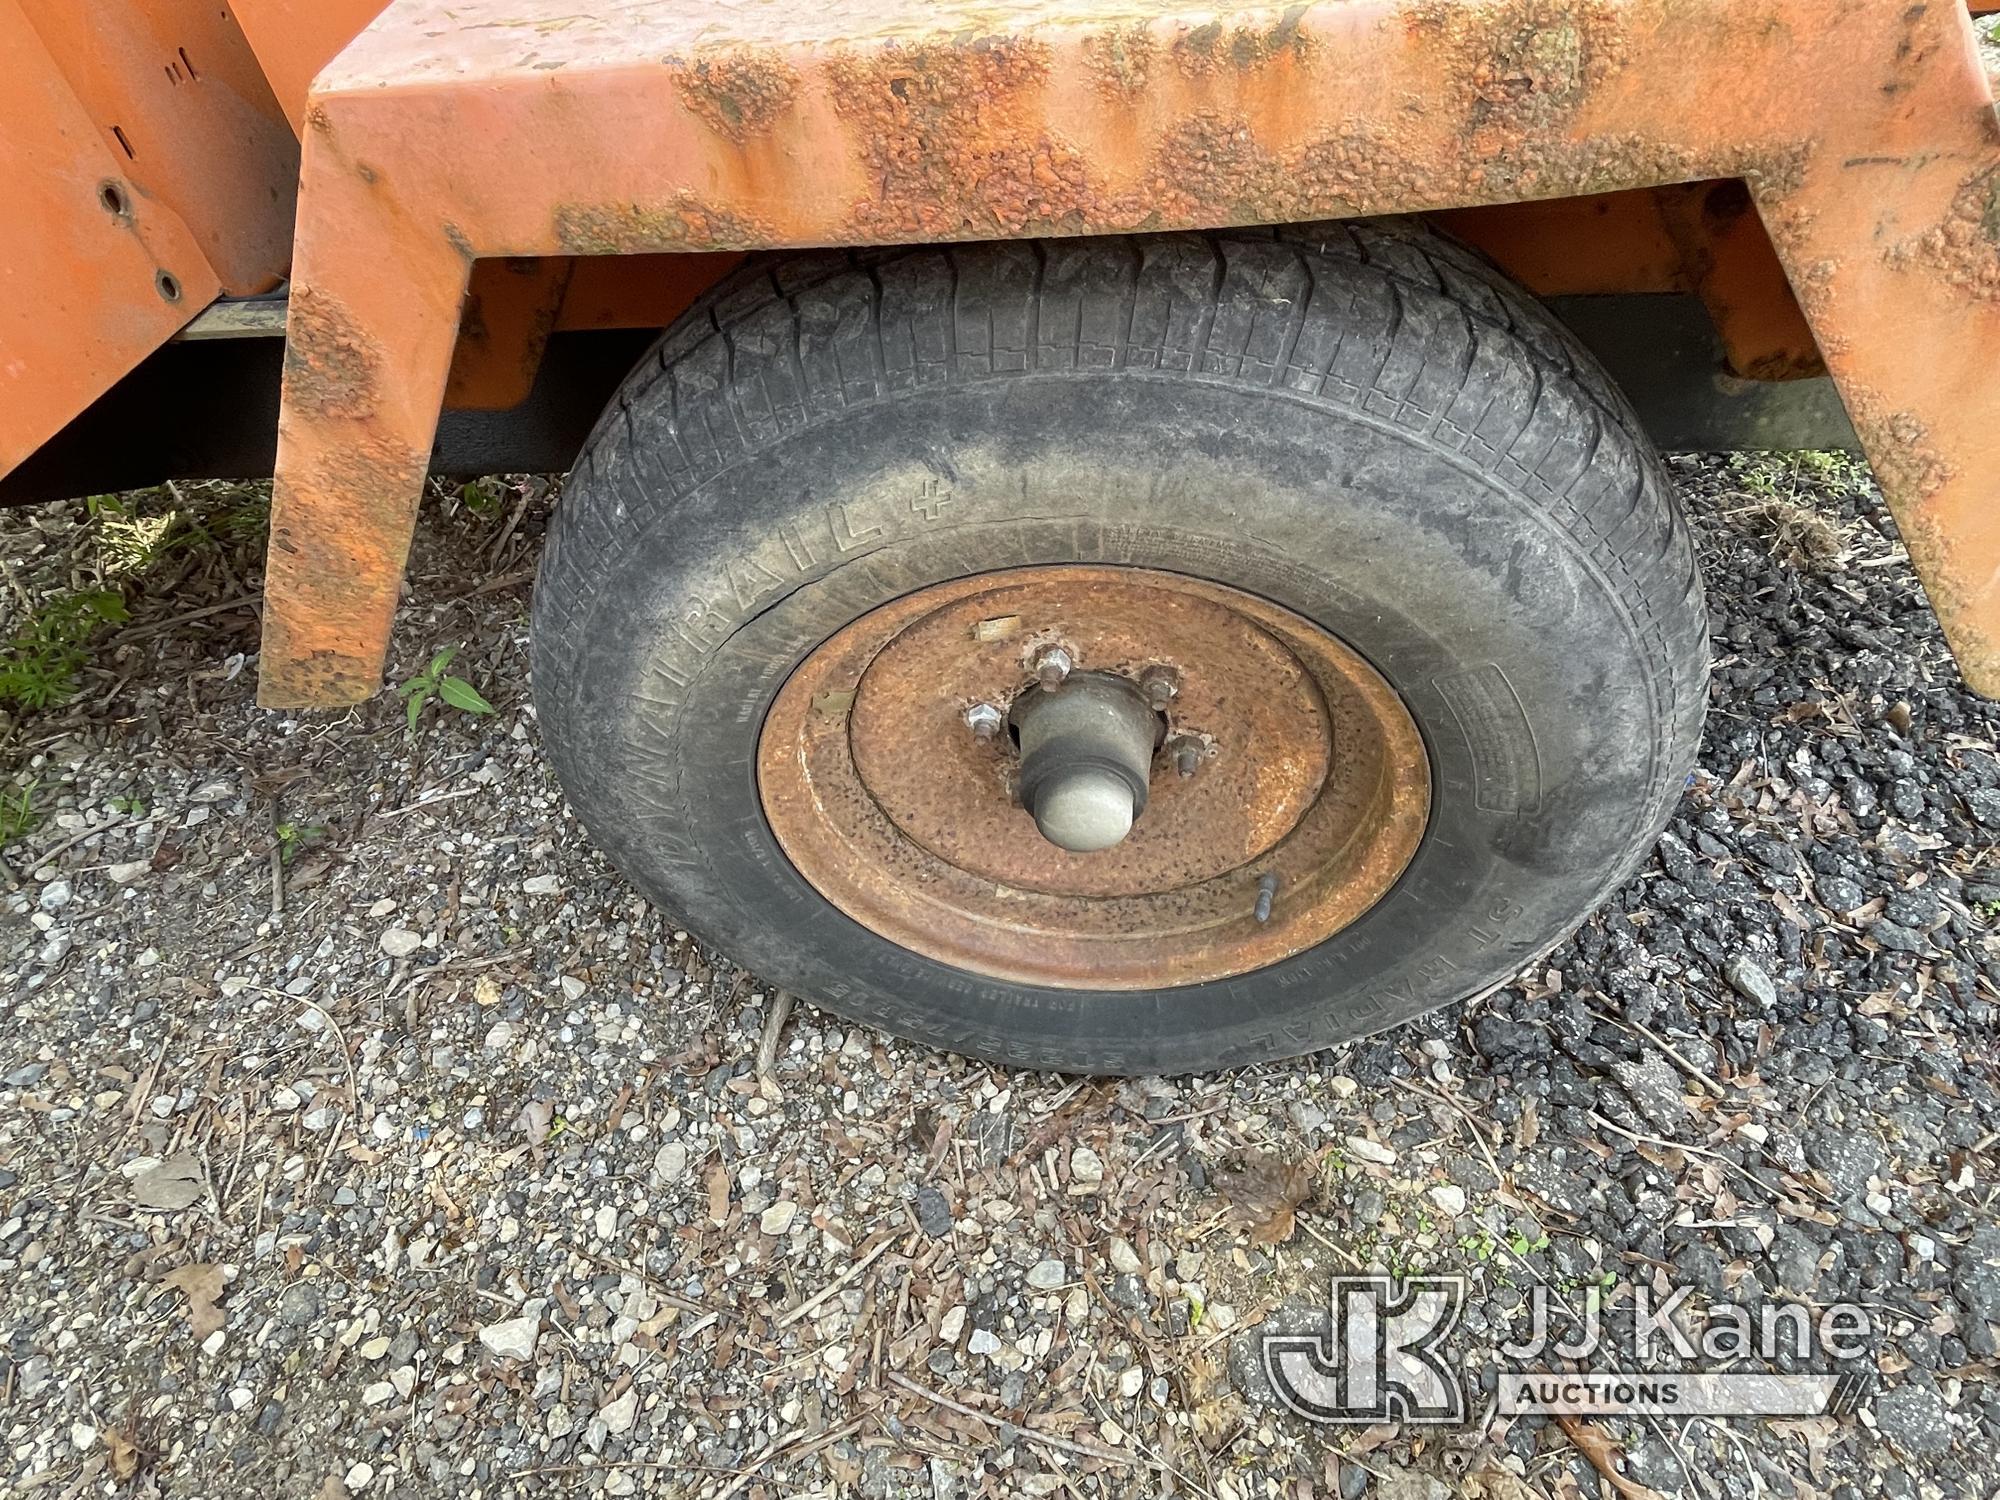 (Plymouth Meeting, PA) 2013 Vermeer BC1000XL Chipper (12in Drum) Bad Engine Not Running Condition Un